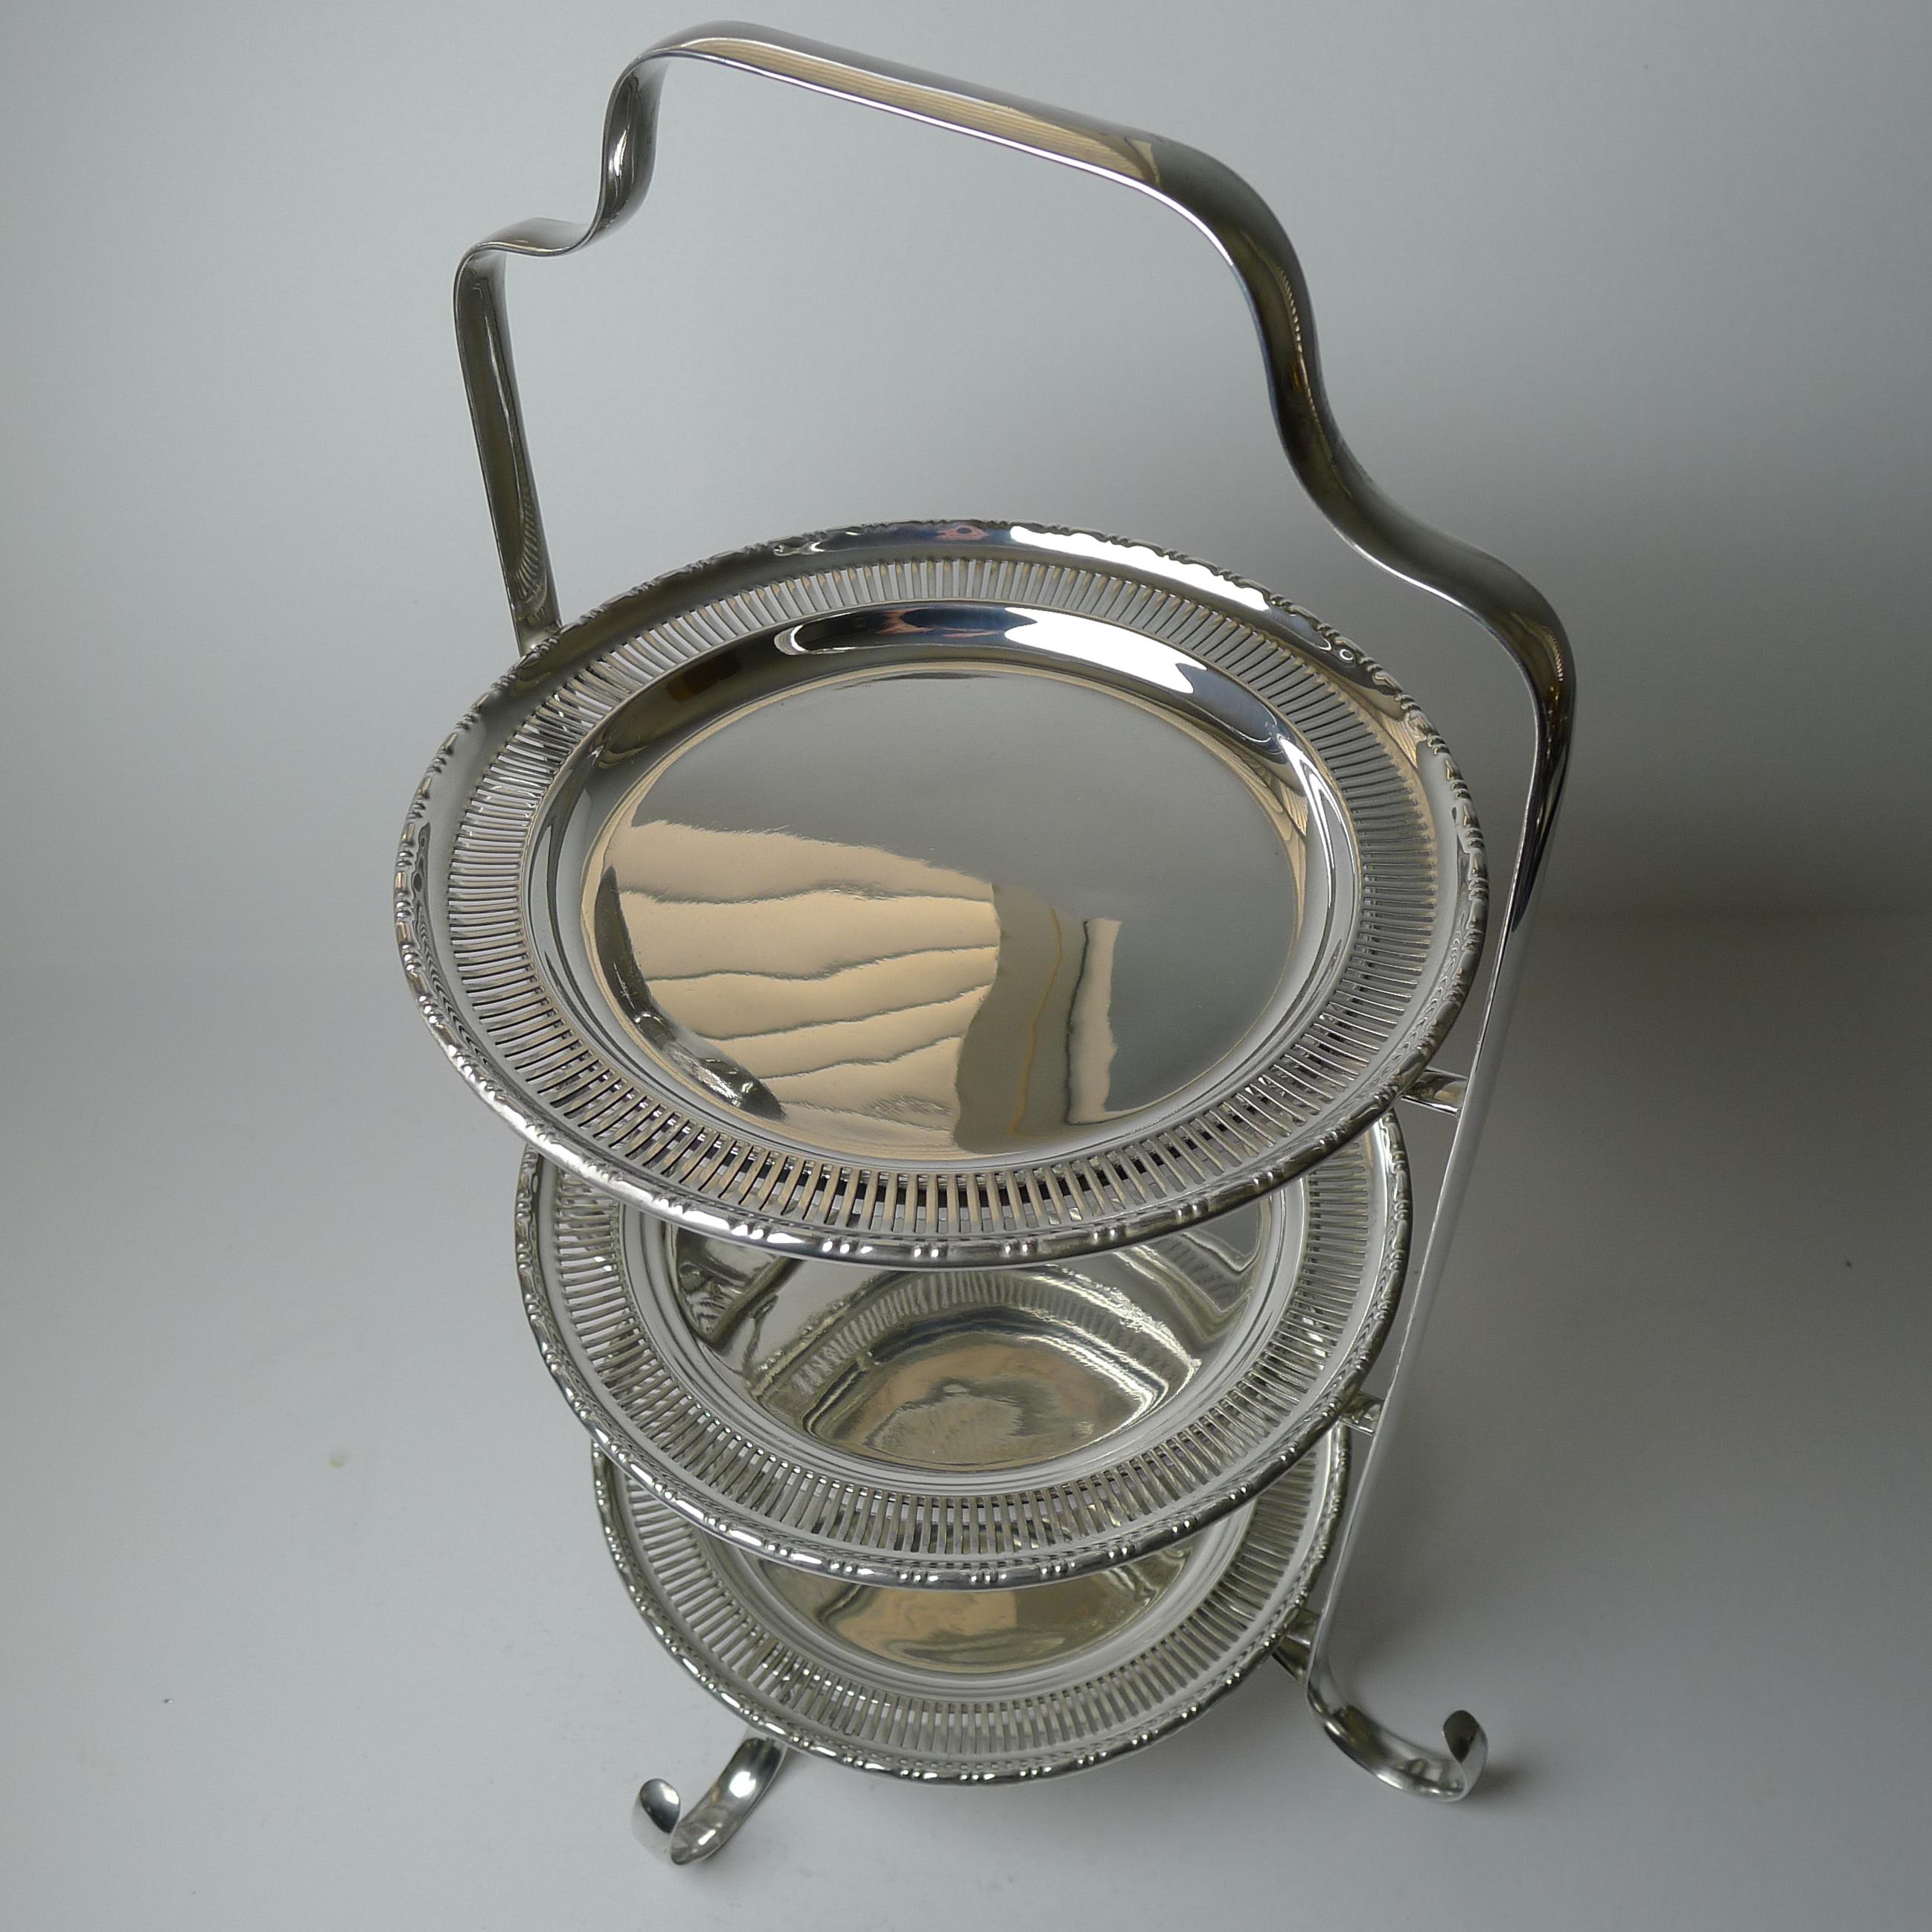 English Art Deco Silver Plated Cake Stand c.1930 2